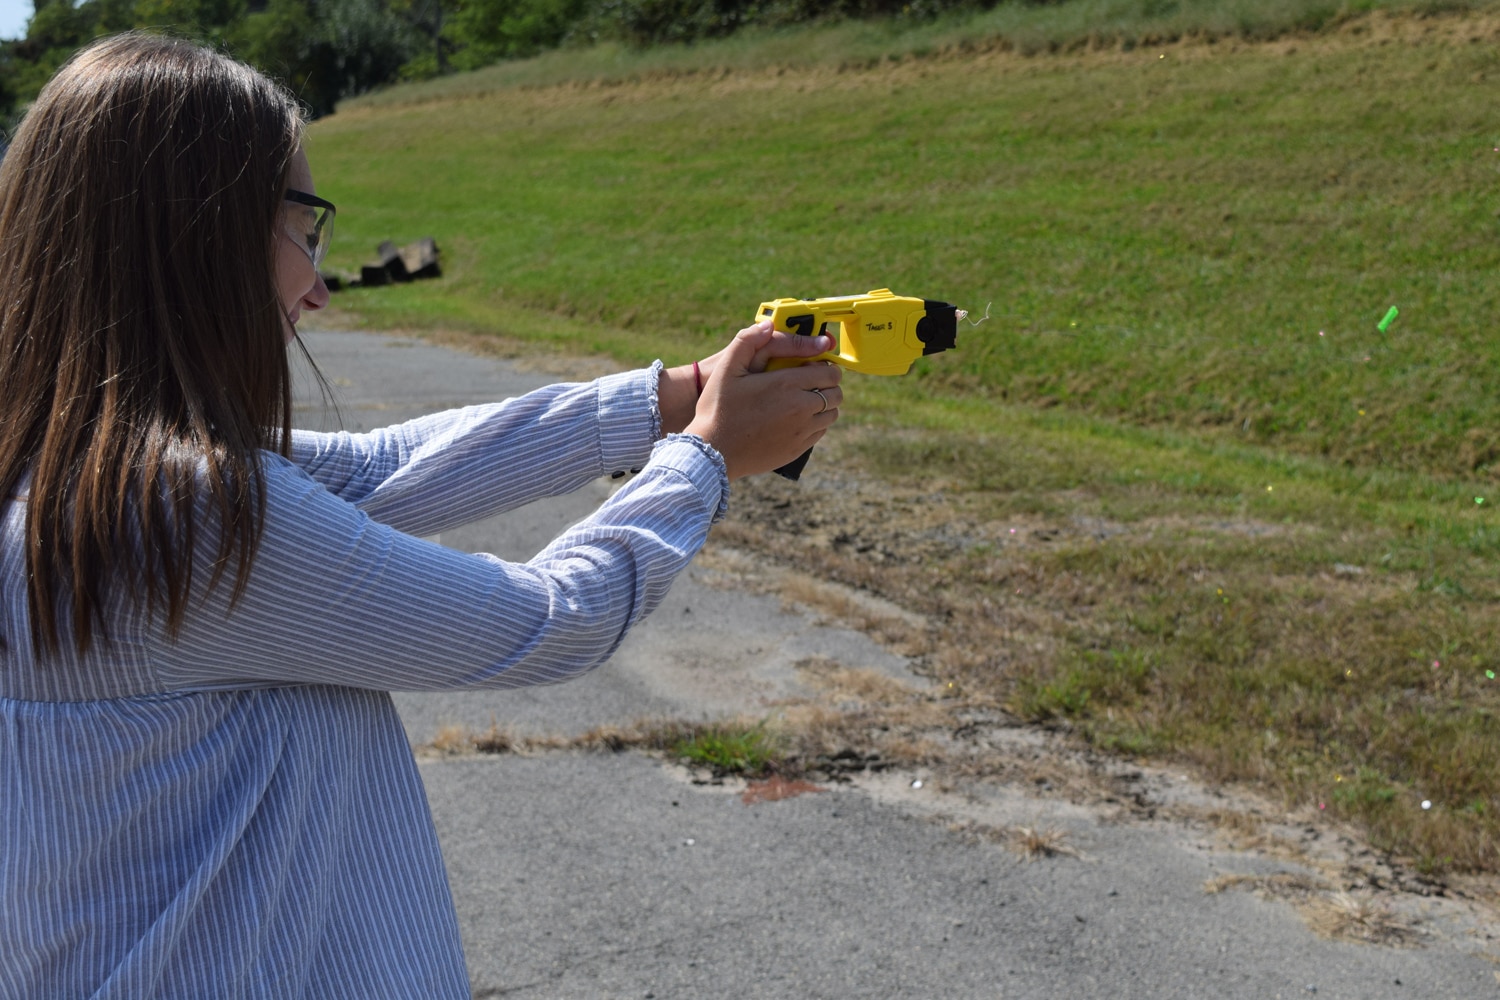 The ATF SRT team also has Tasers as part of their less lethal line. (Photo: Daniel Terrill/Guns.com) 